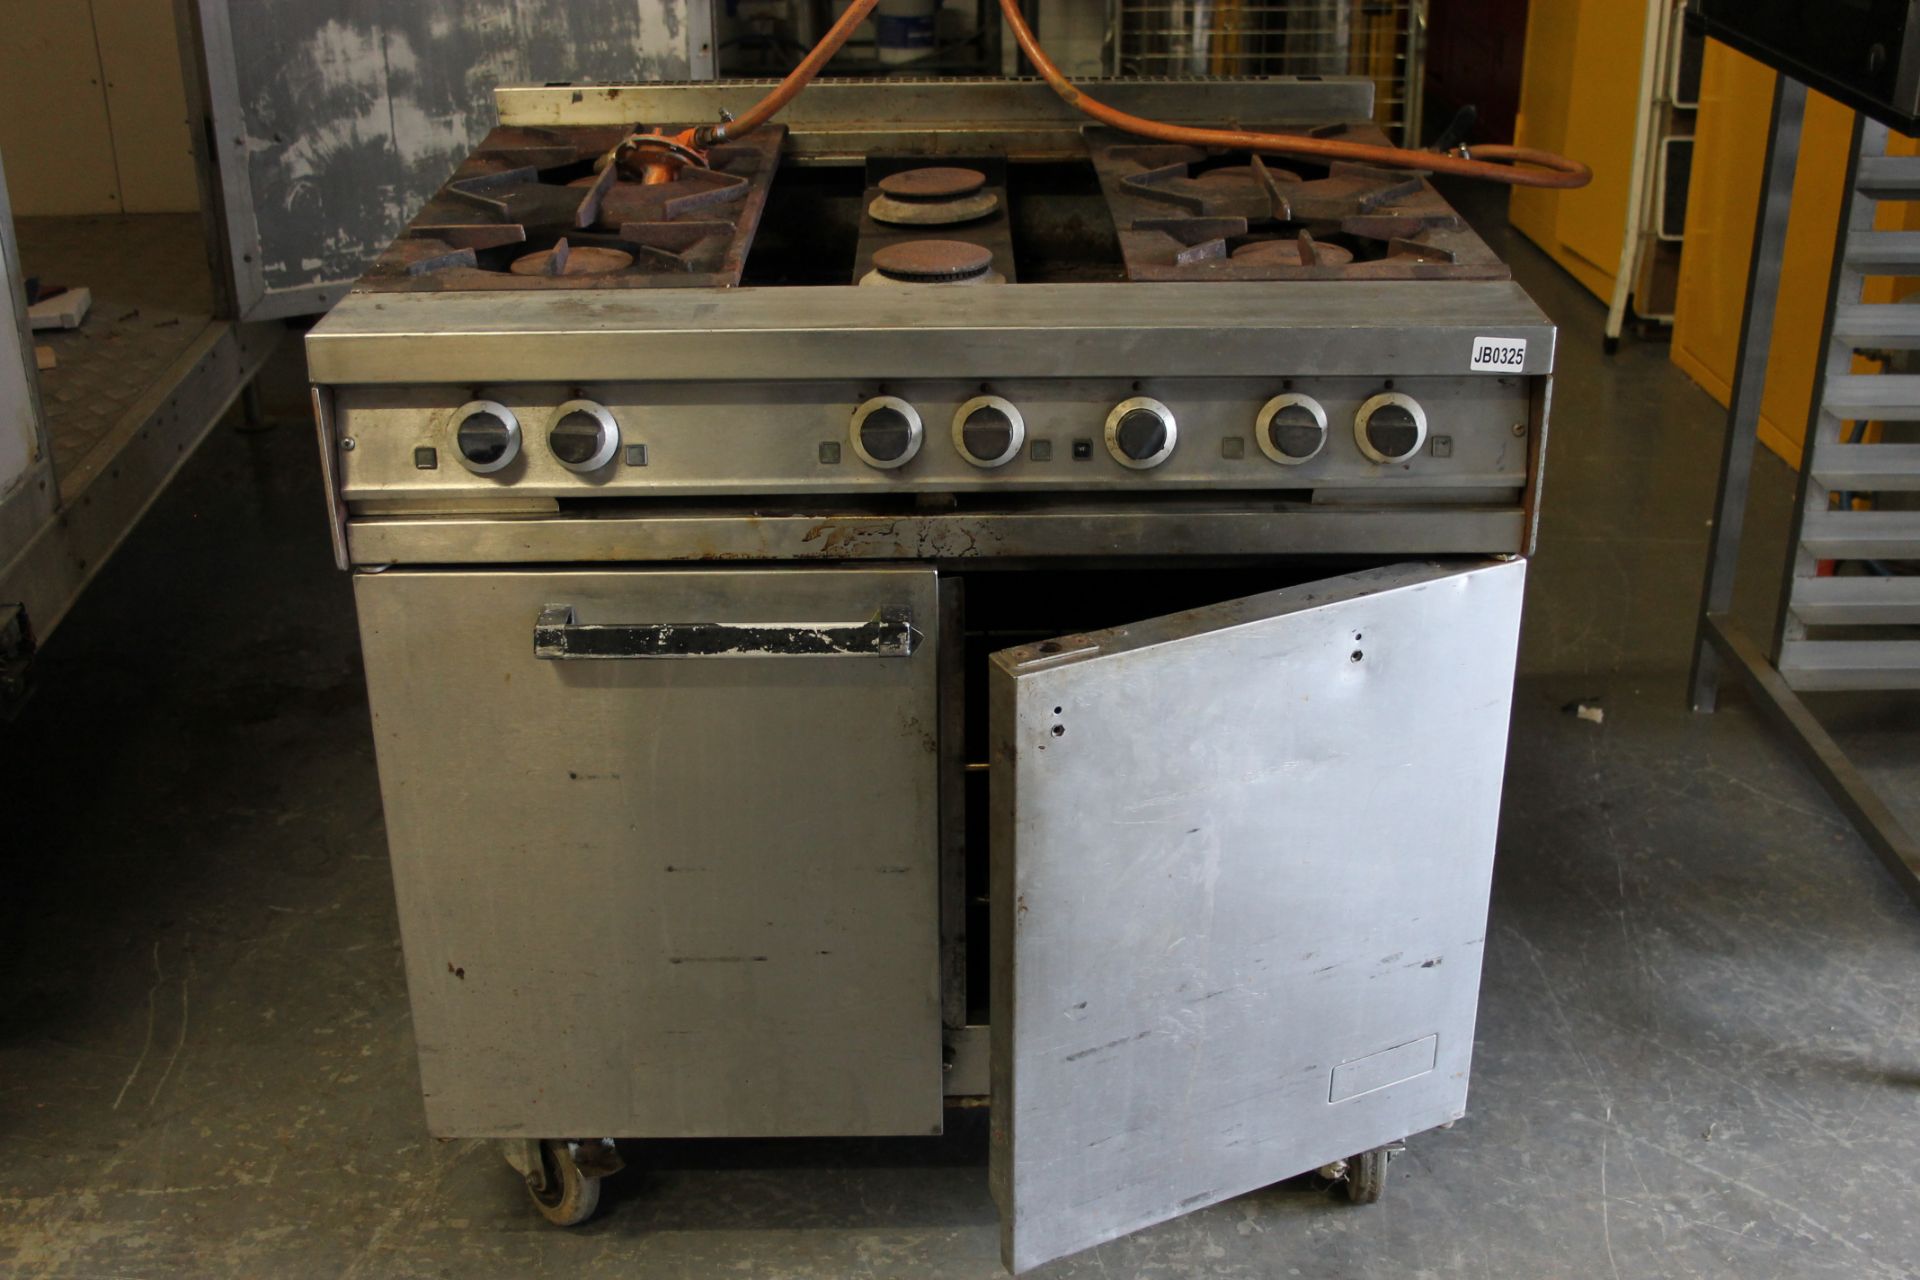 Falcon Dominator Six Burner Gas Cooker & Double Oven - as found - Image 3 of 3